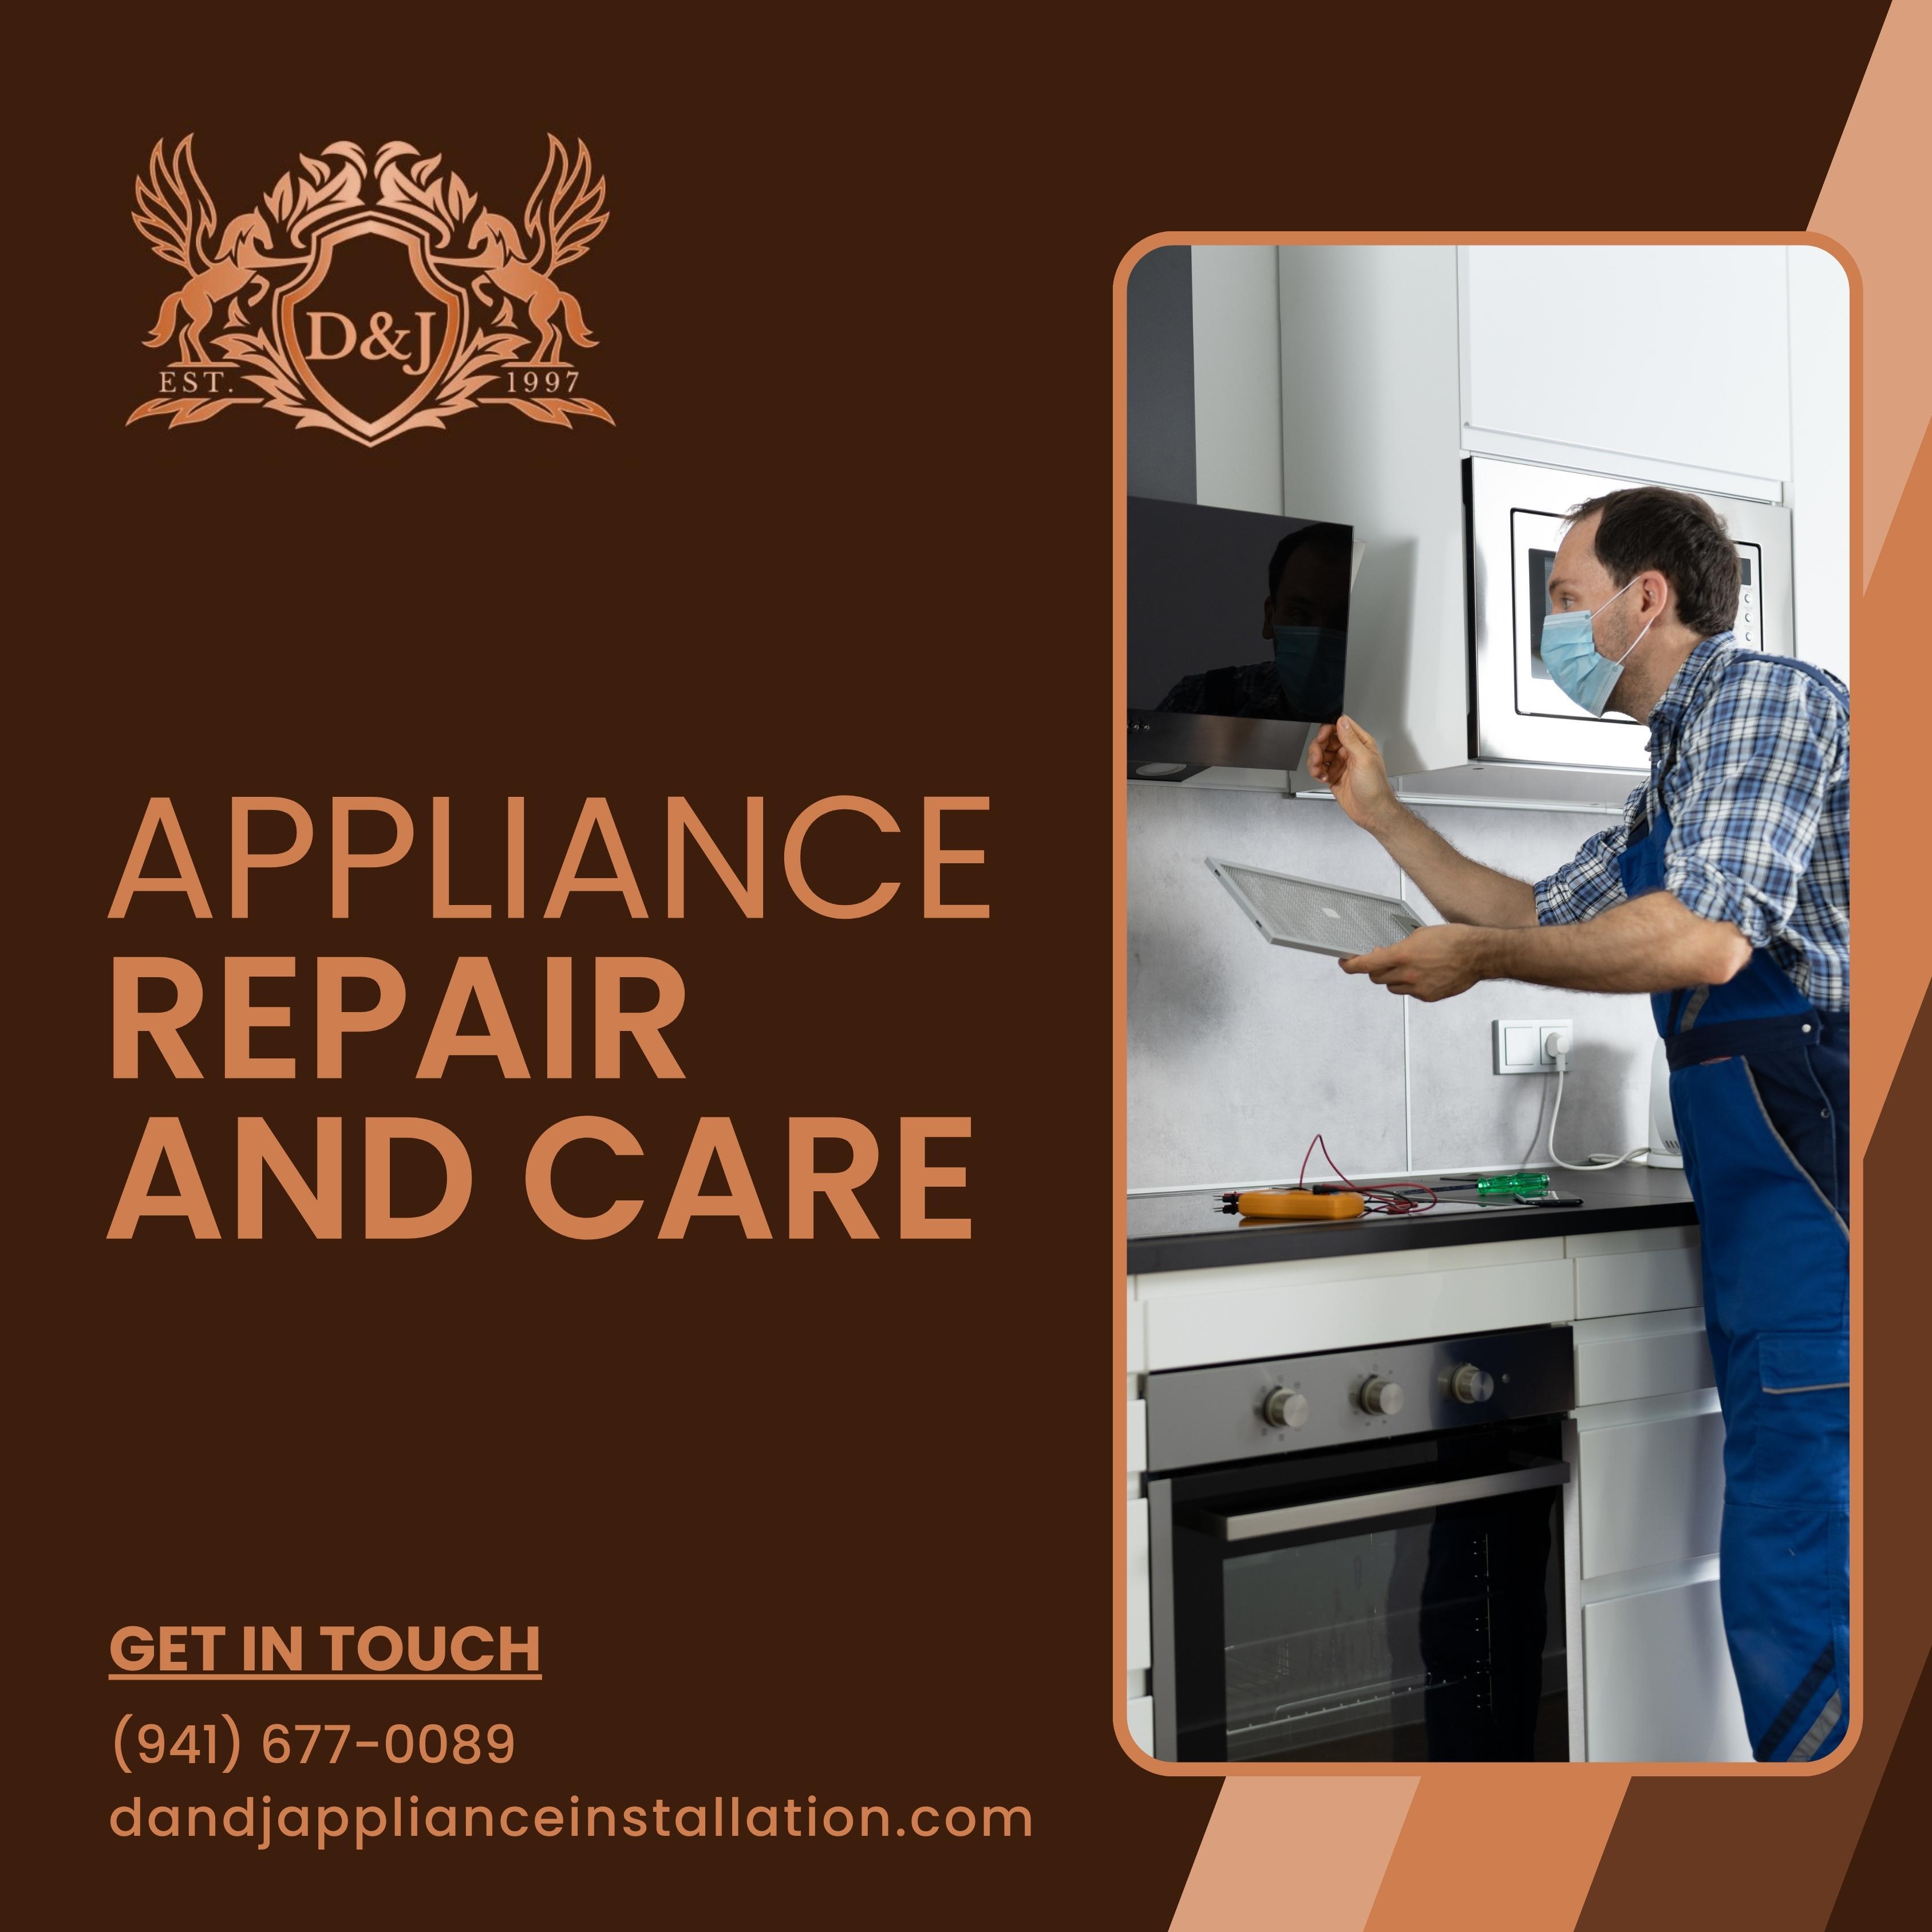 Appliance Installation and Services Trusted Partner for Seamless Appliance Solutions